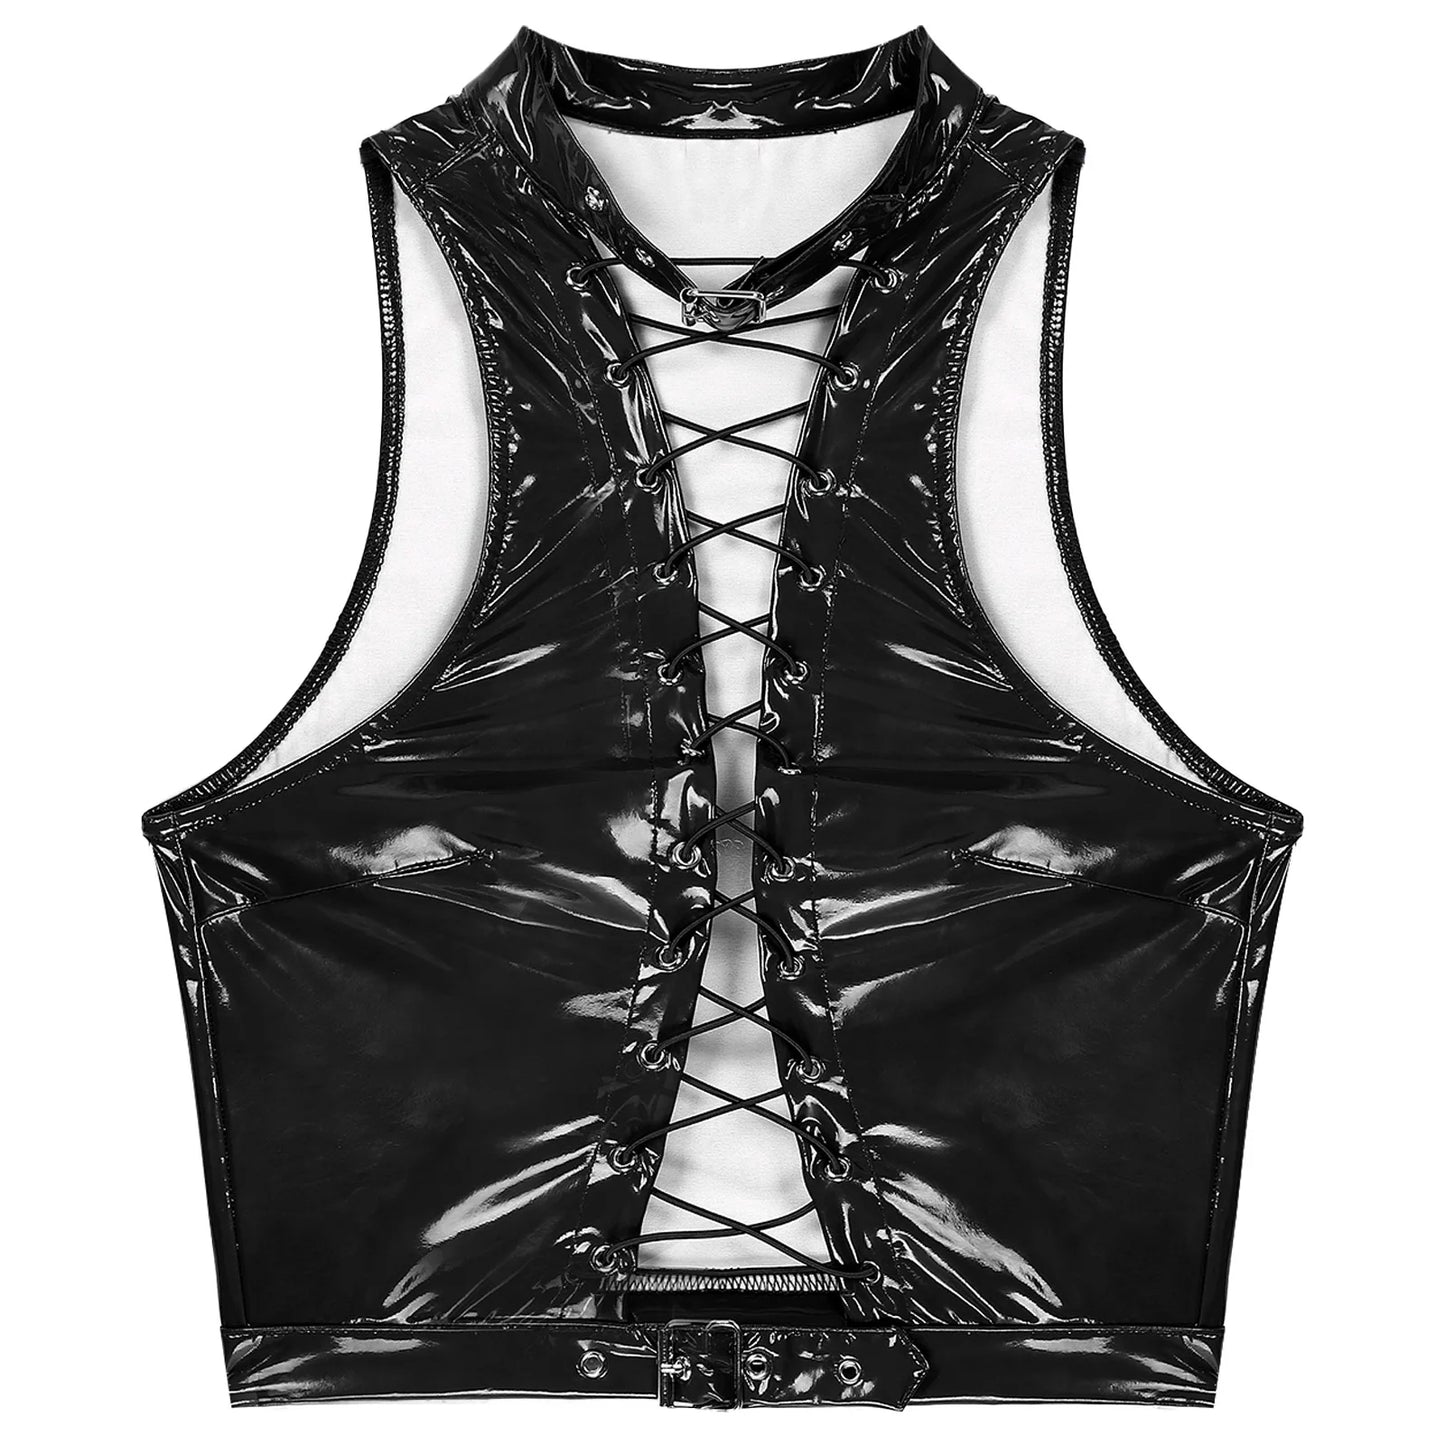 Sleeveless Crop Top for Women Adjustable Buckle at Neckline Hem Hollow Out Eyelet Lace-Up Vest Tank Tops Gothic Punk Camis Tanks